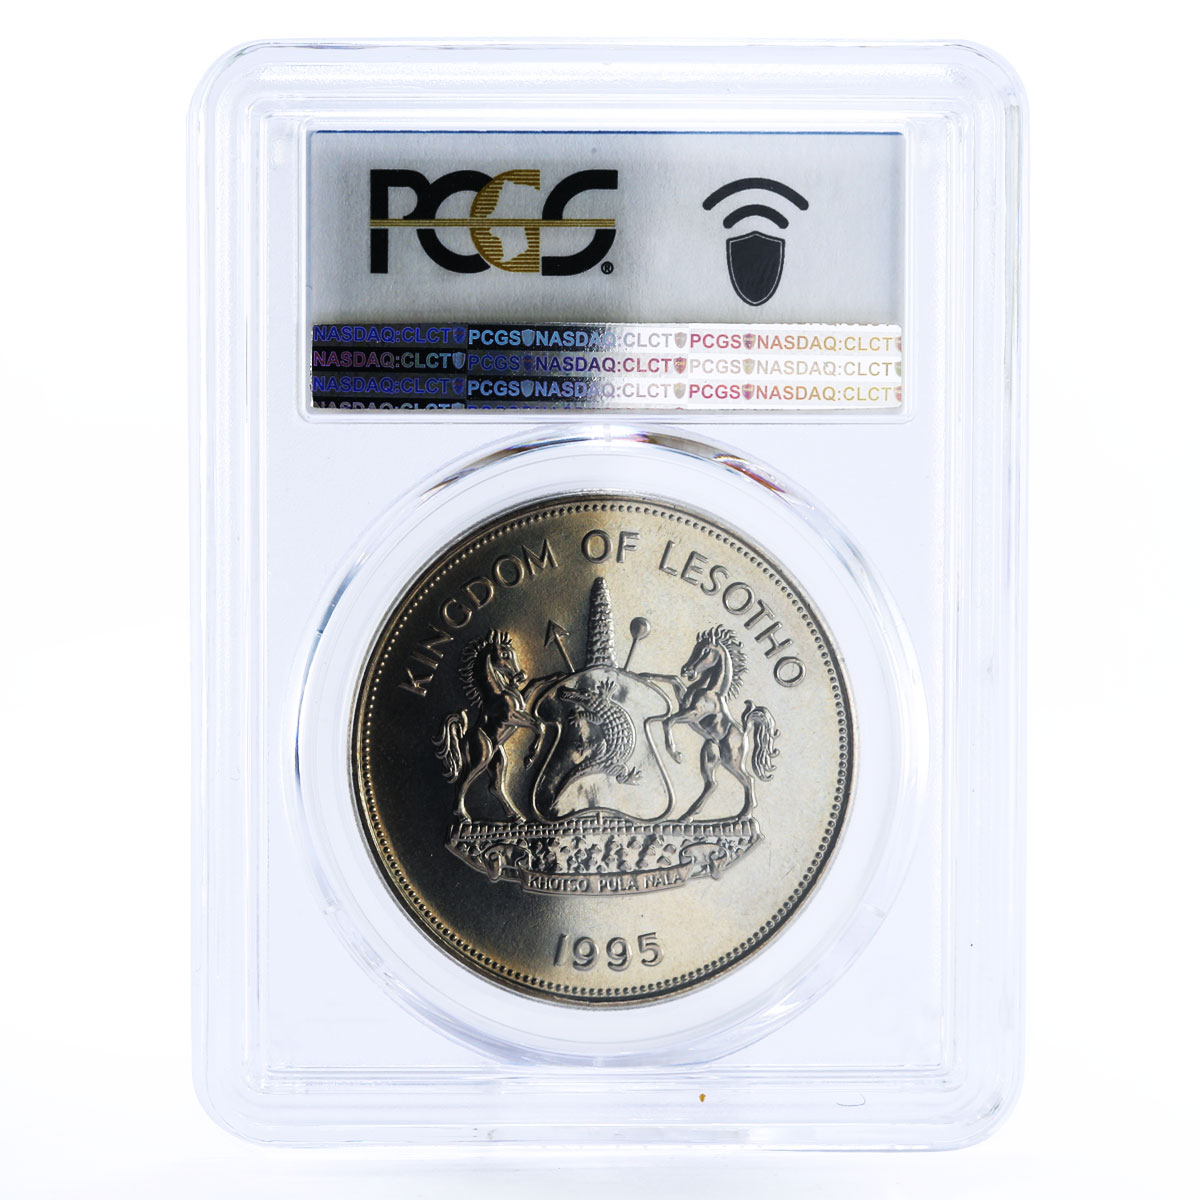 Lesotho 1 loti 50th Anniversary of the United Nations MS68 PCGS CuNi coin 1995